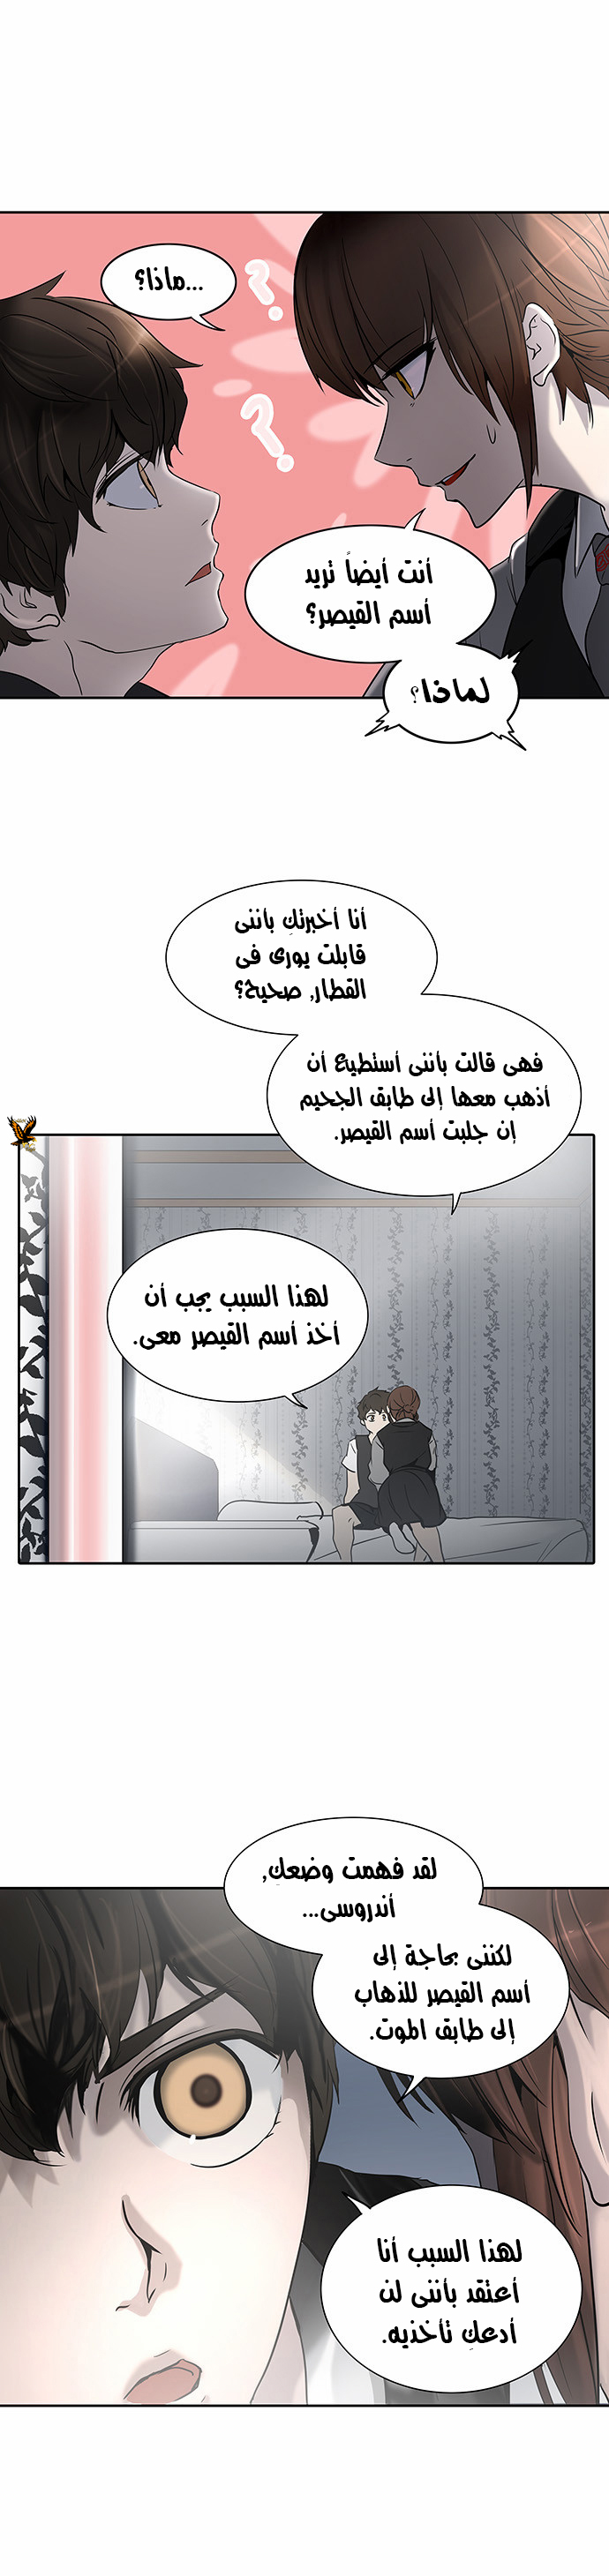 Tower of God 2: Chapter 206 - Page 1